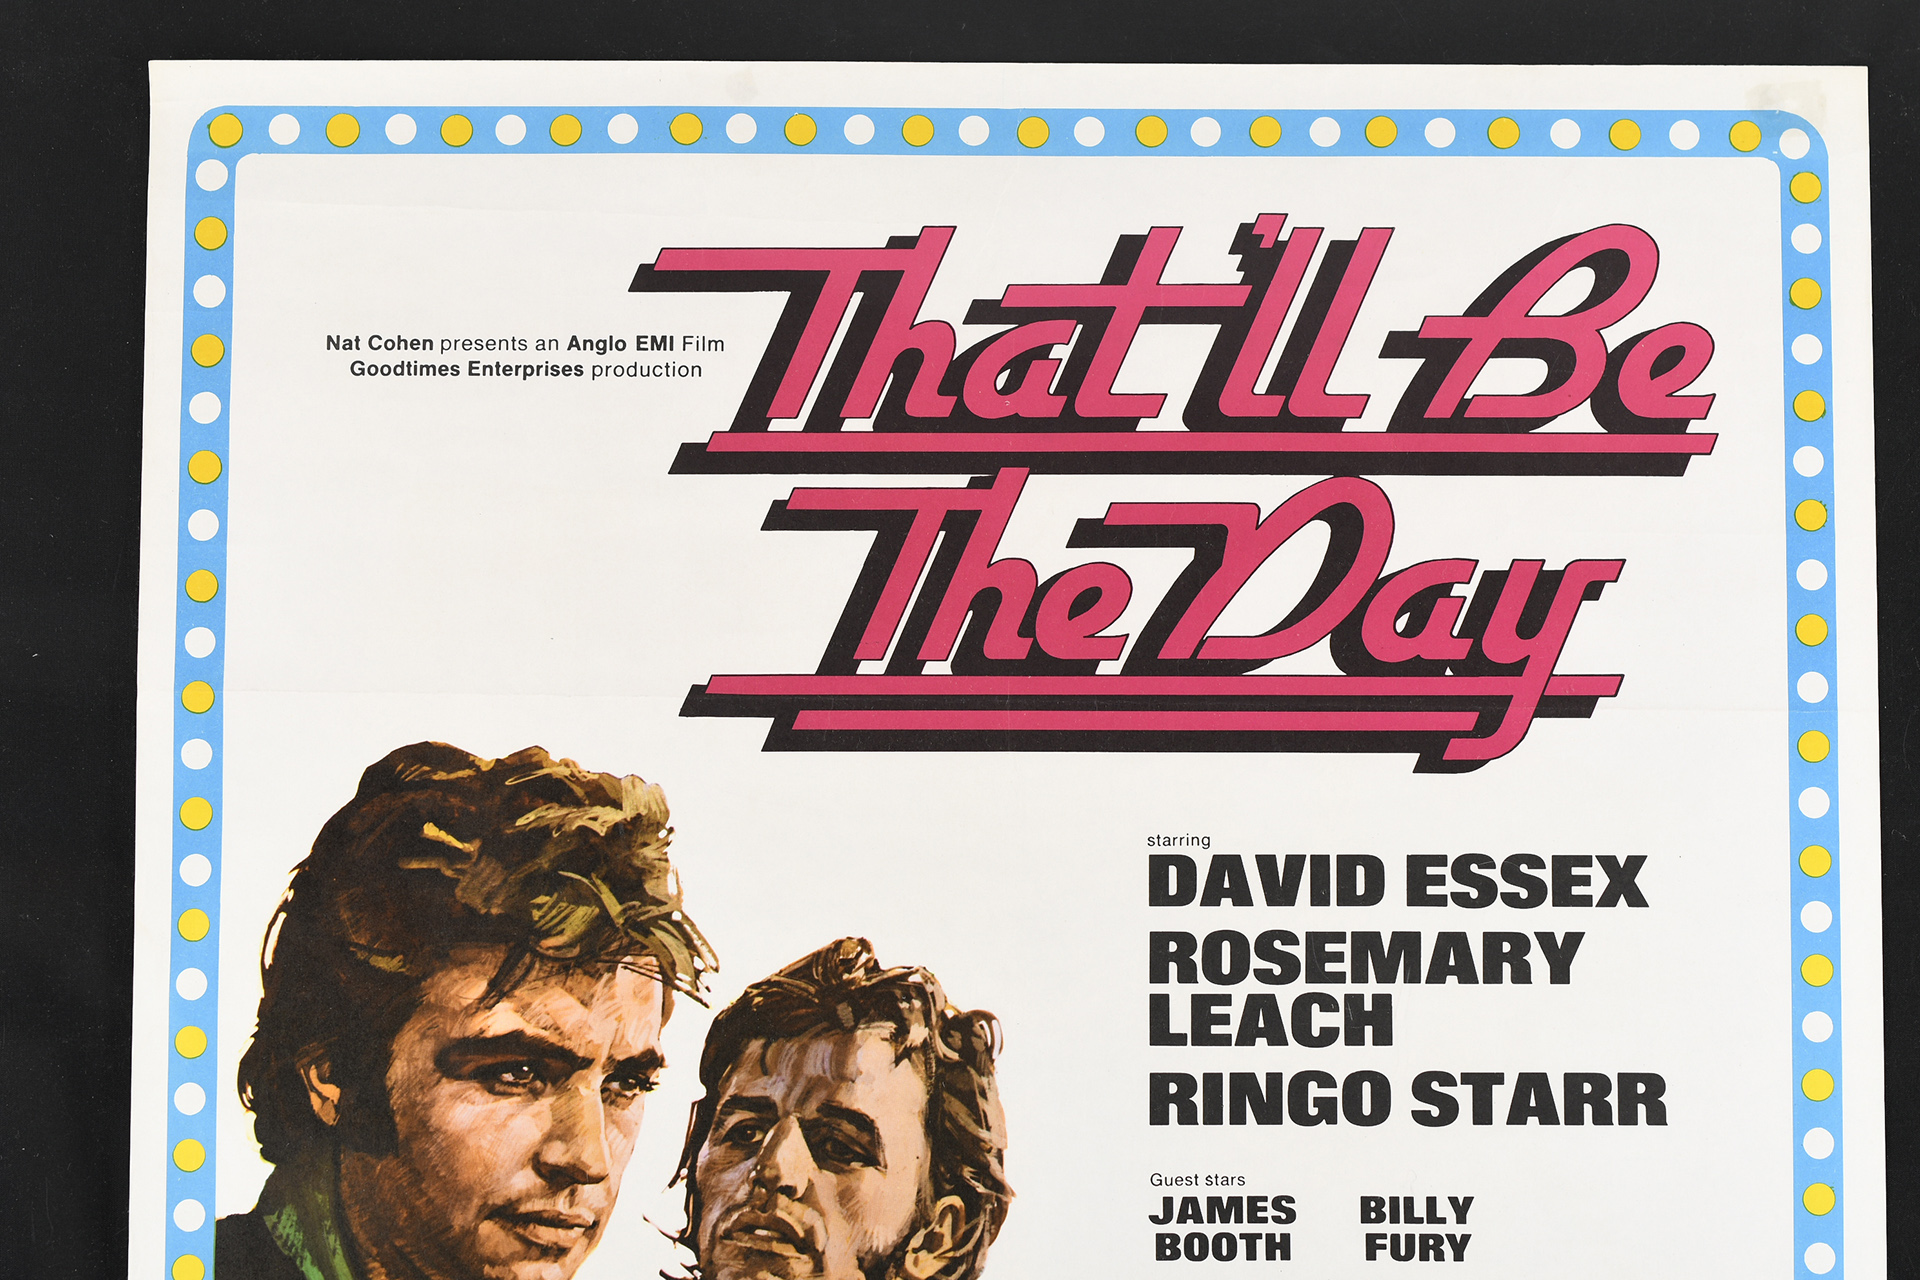 Original "That'll be the Day" Cinema Poster